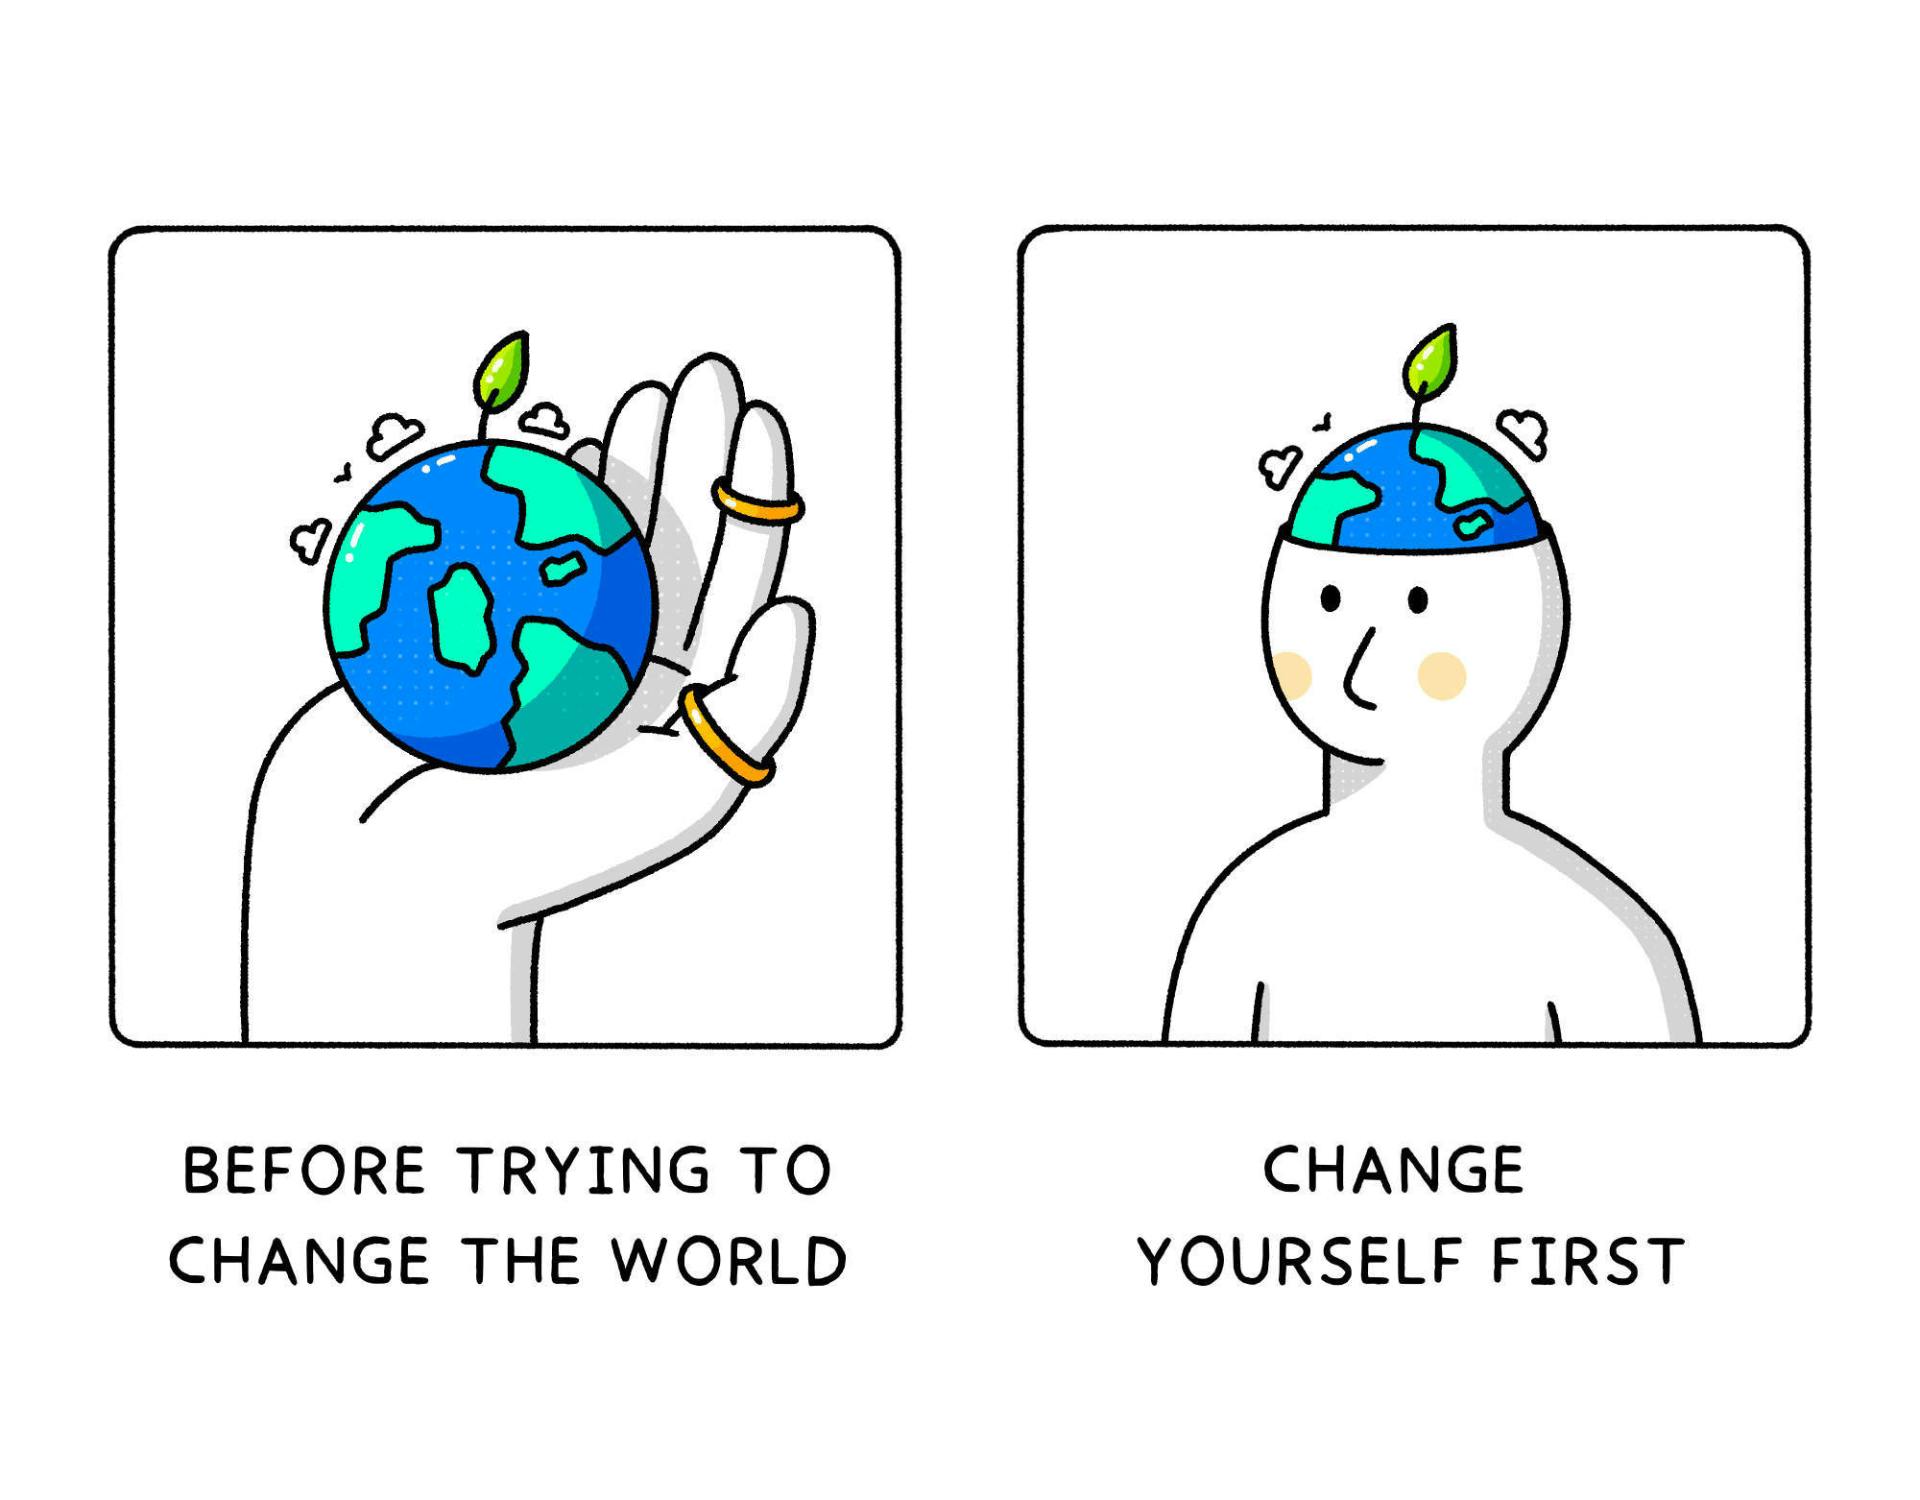 Before trying to change the world, change yourself first, with illustration